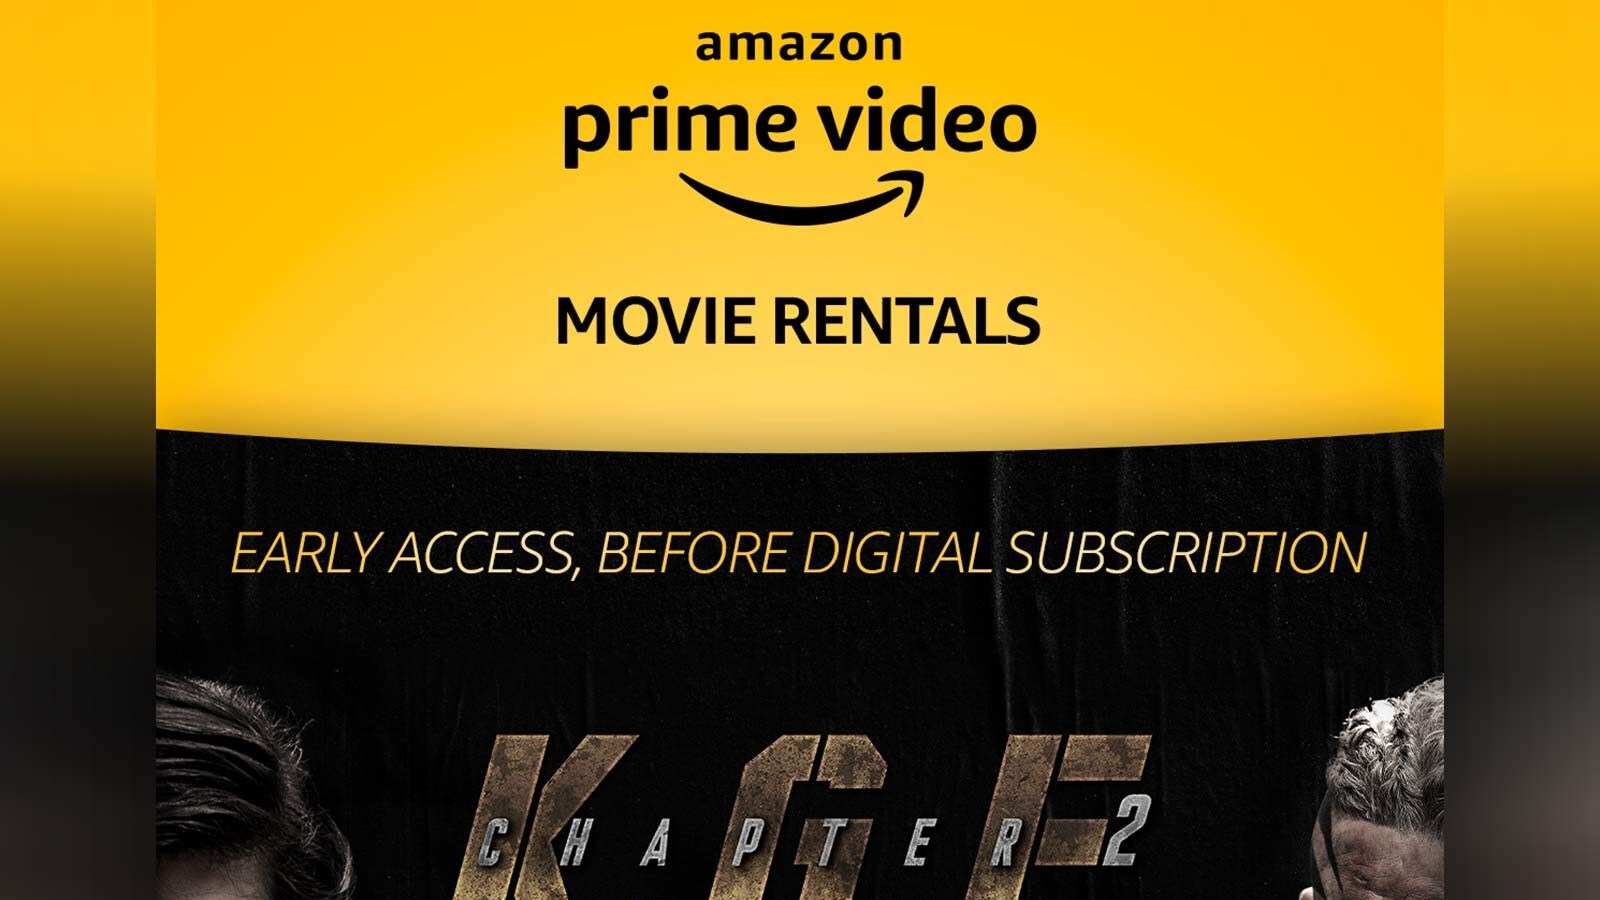 Now Enjoy Movie Rentals on Prime Video! Get early access rentals